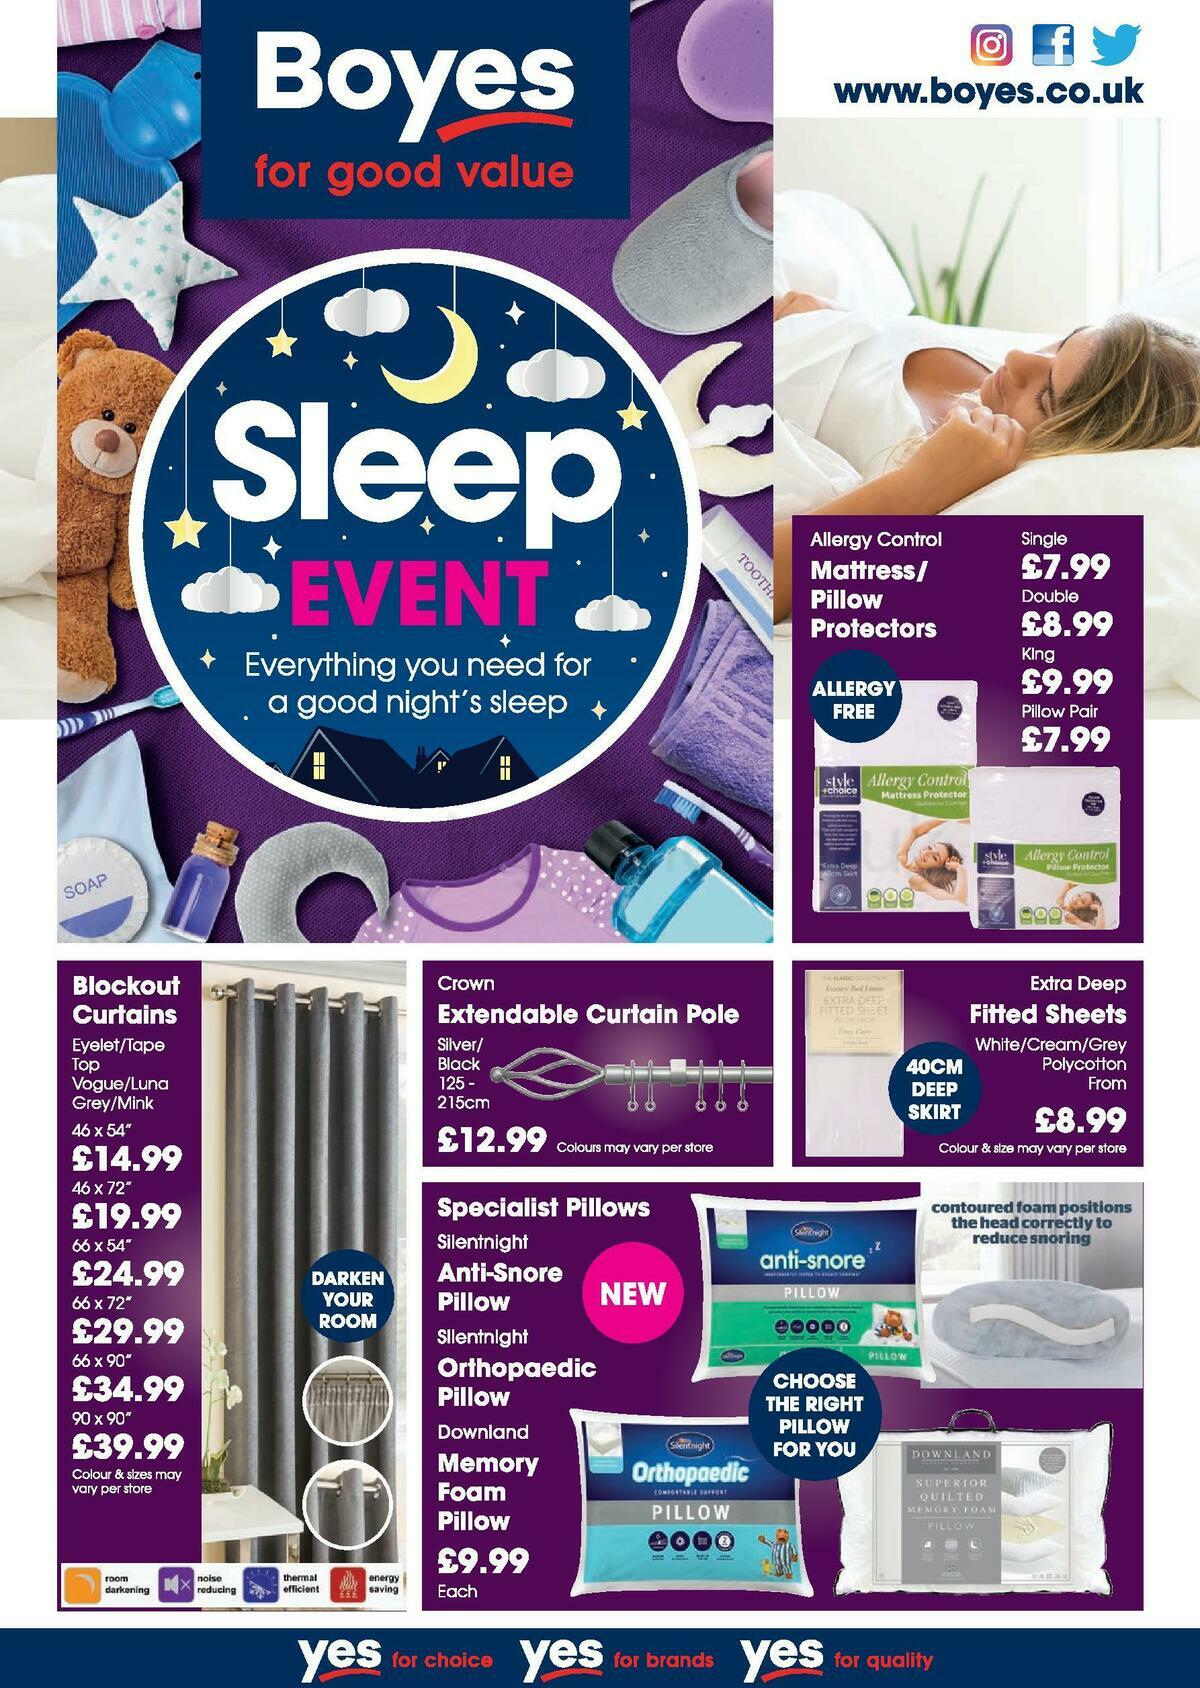 Boyes Sleep Event Offers from 25 April